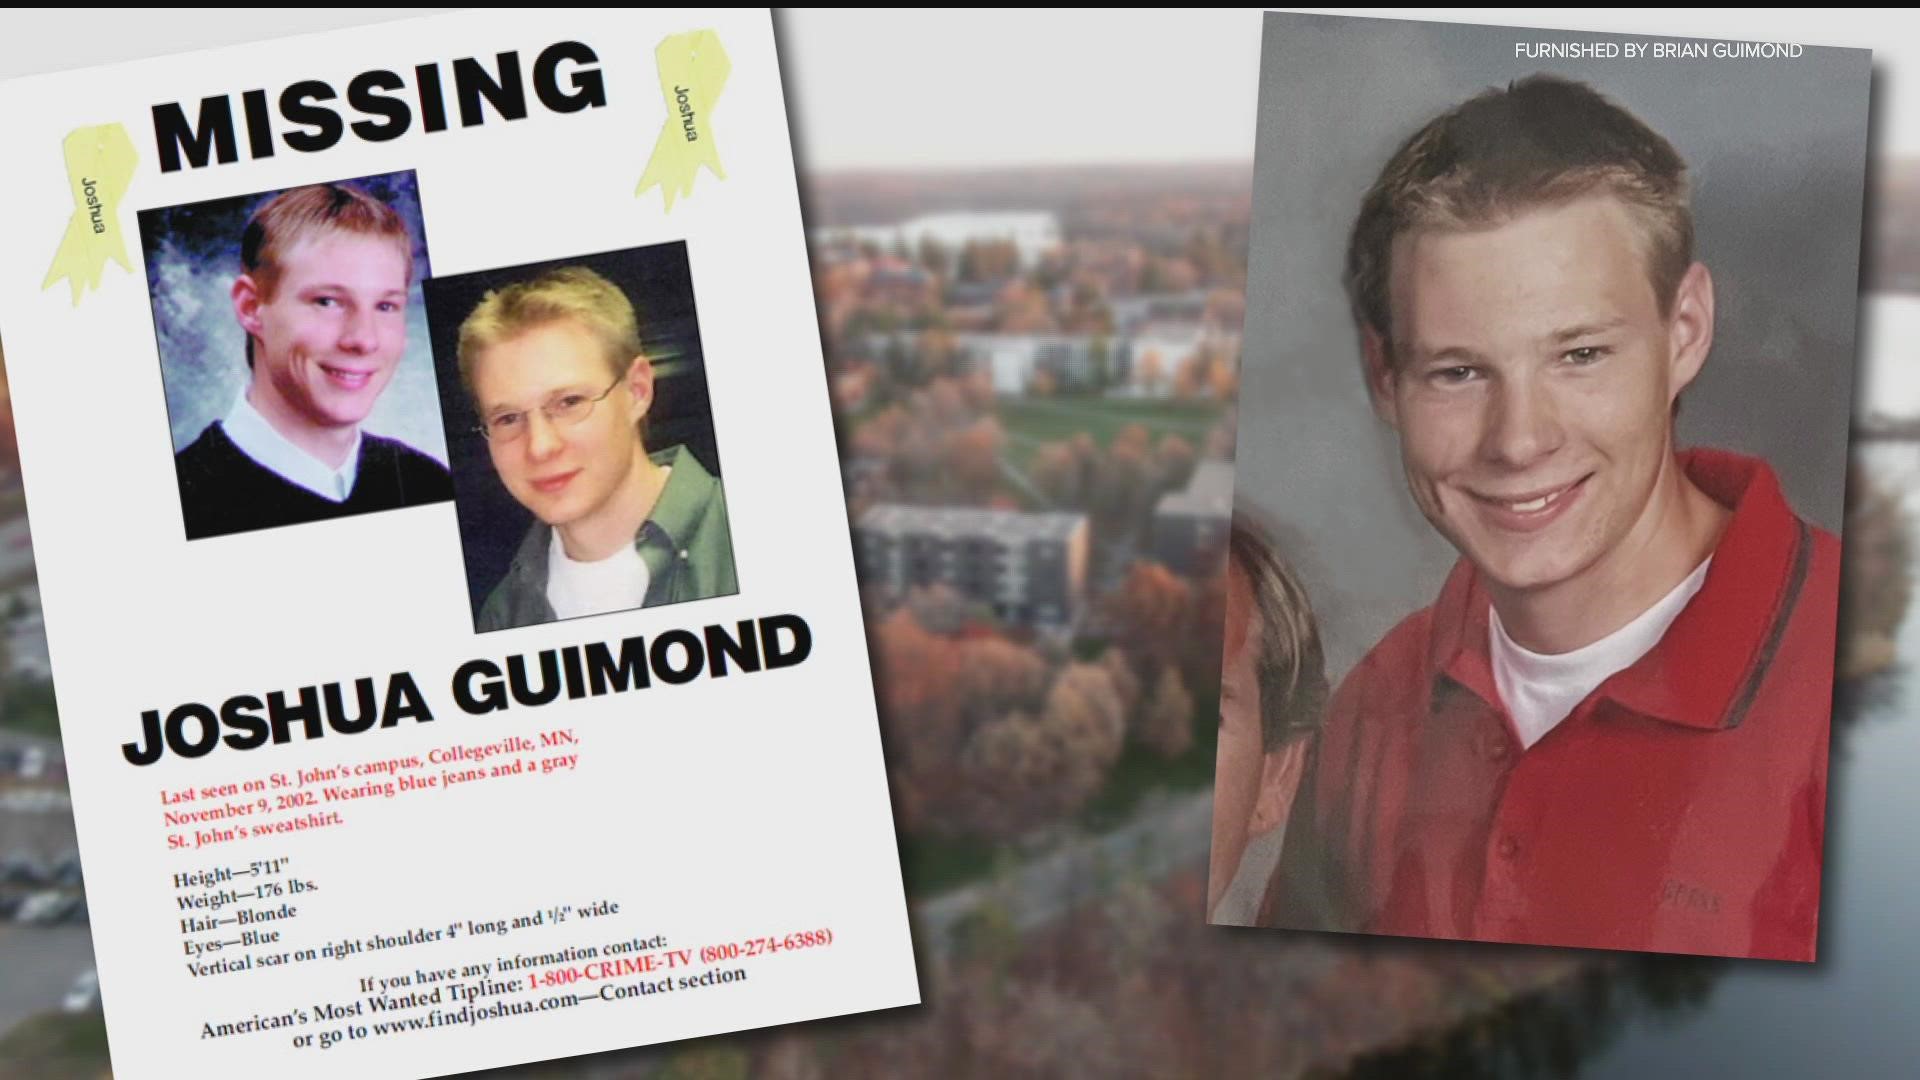 Josh Guimond disappeared from St. John’s University 20 years ago. New information is now available and Stearns County investigators are asking for tips.